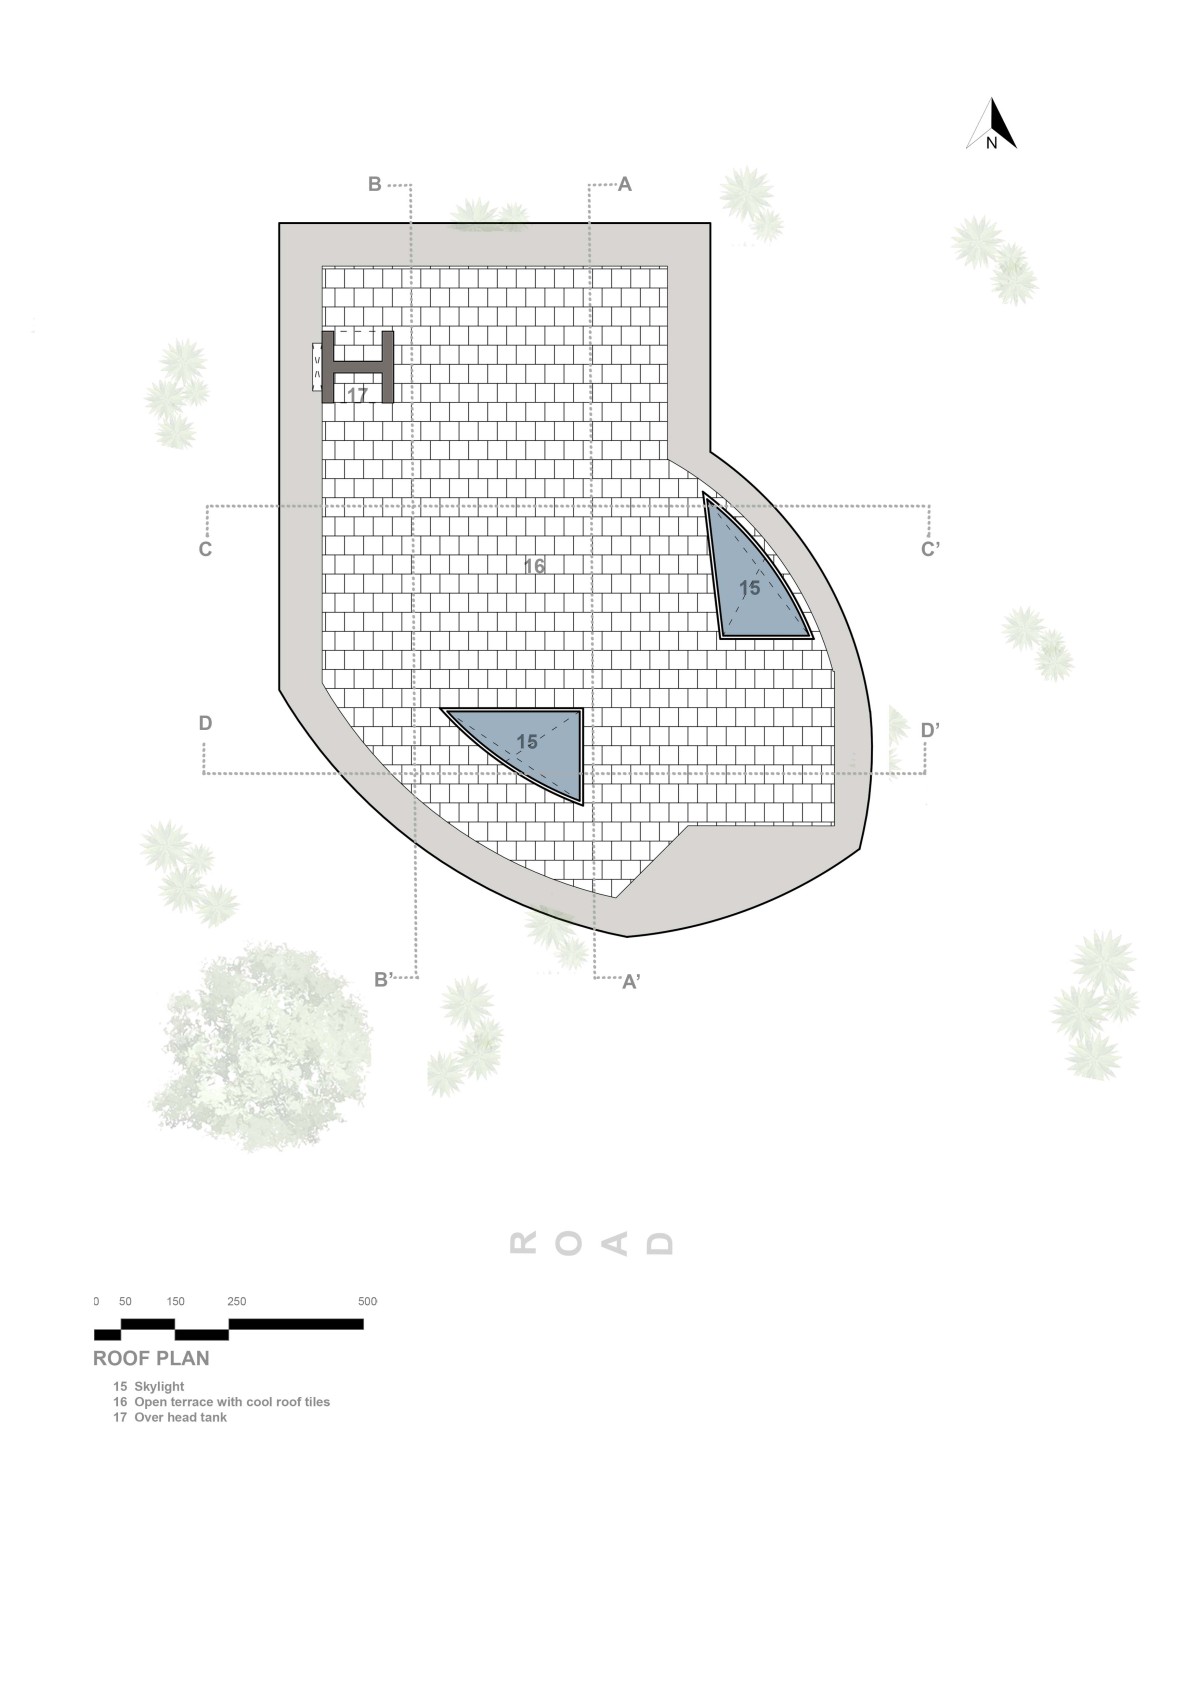 Roof plan of Aadhi Residence by RP Architects